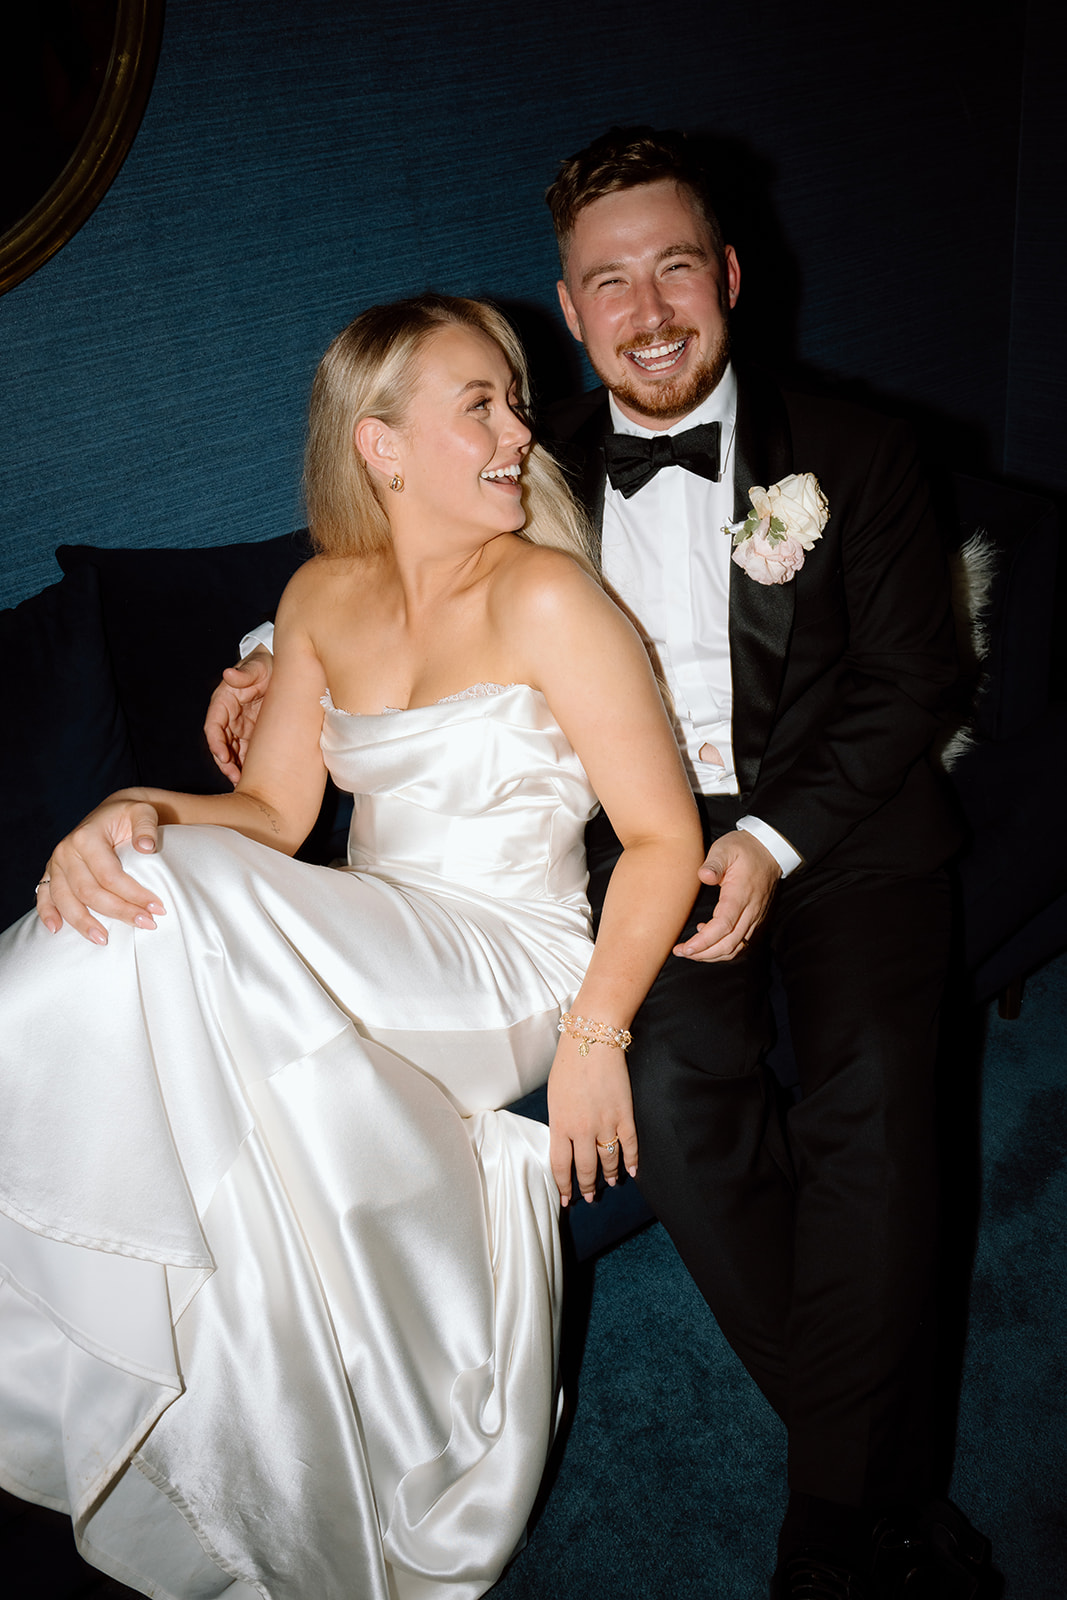 Couple after party portraits at the wedding in the Southern Highlands Bendooley Estate